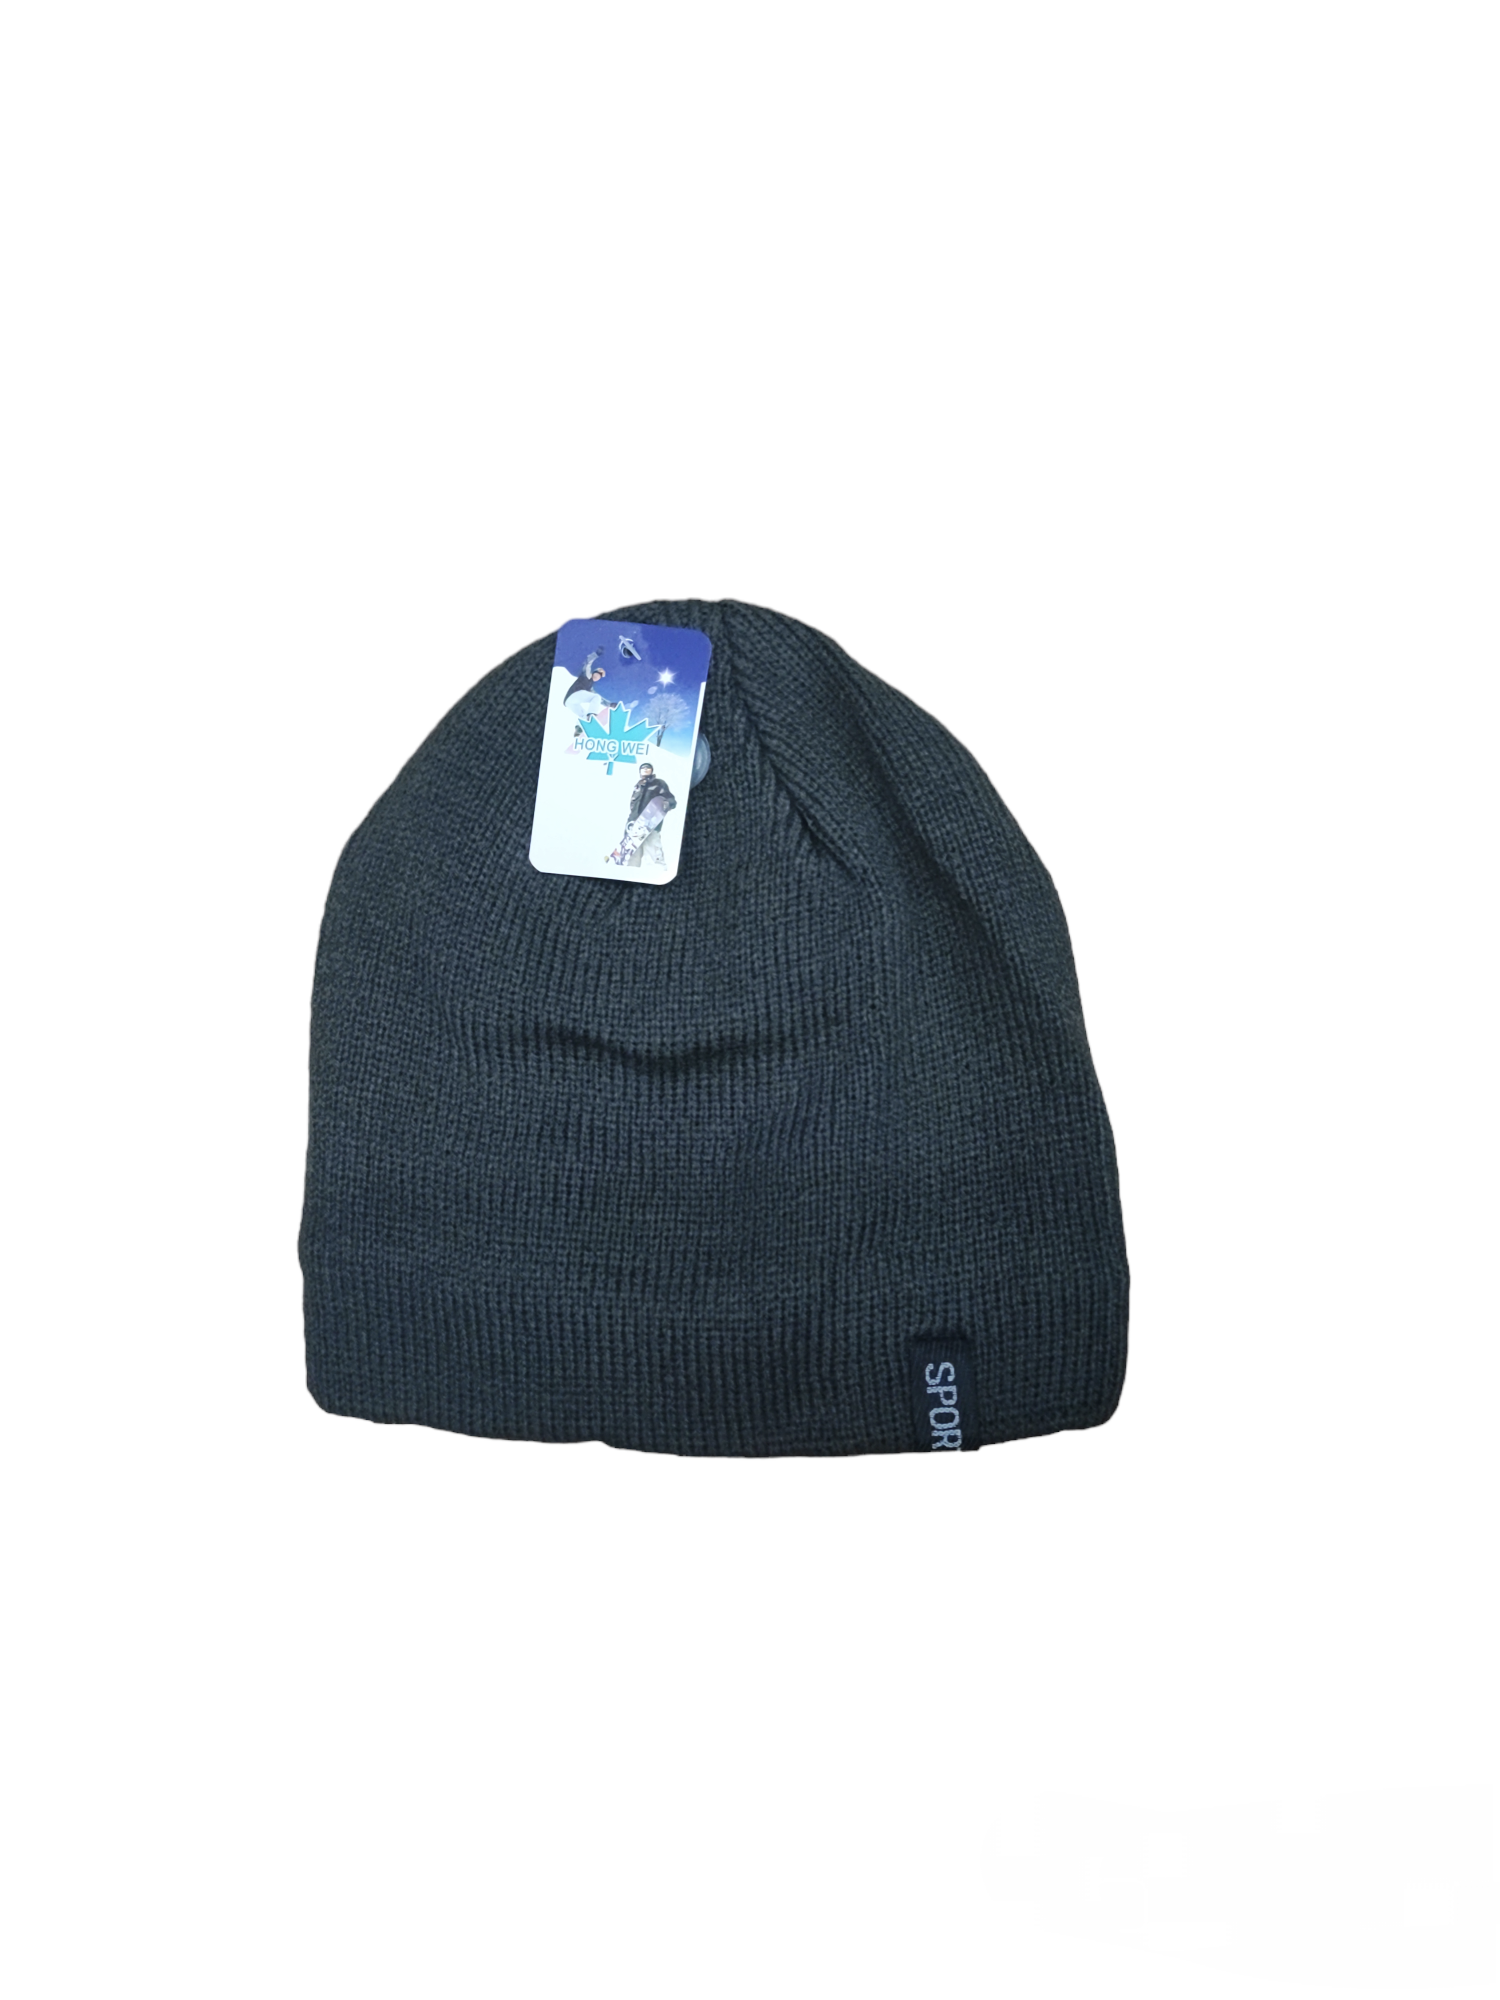 Fleece hat with sports writing detail (x12)#5